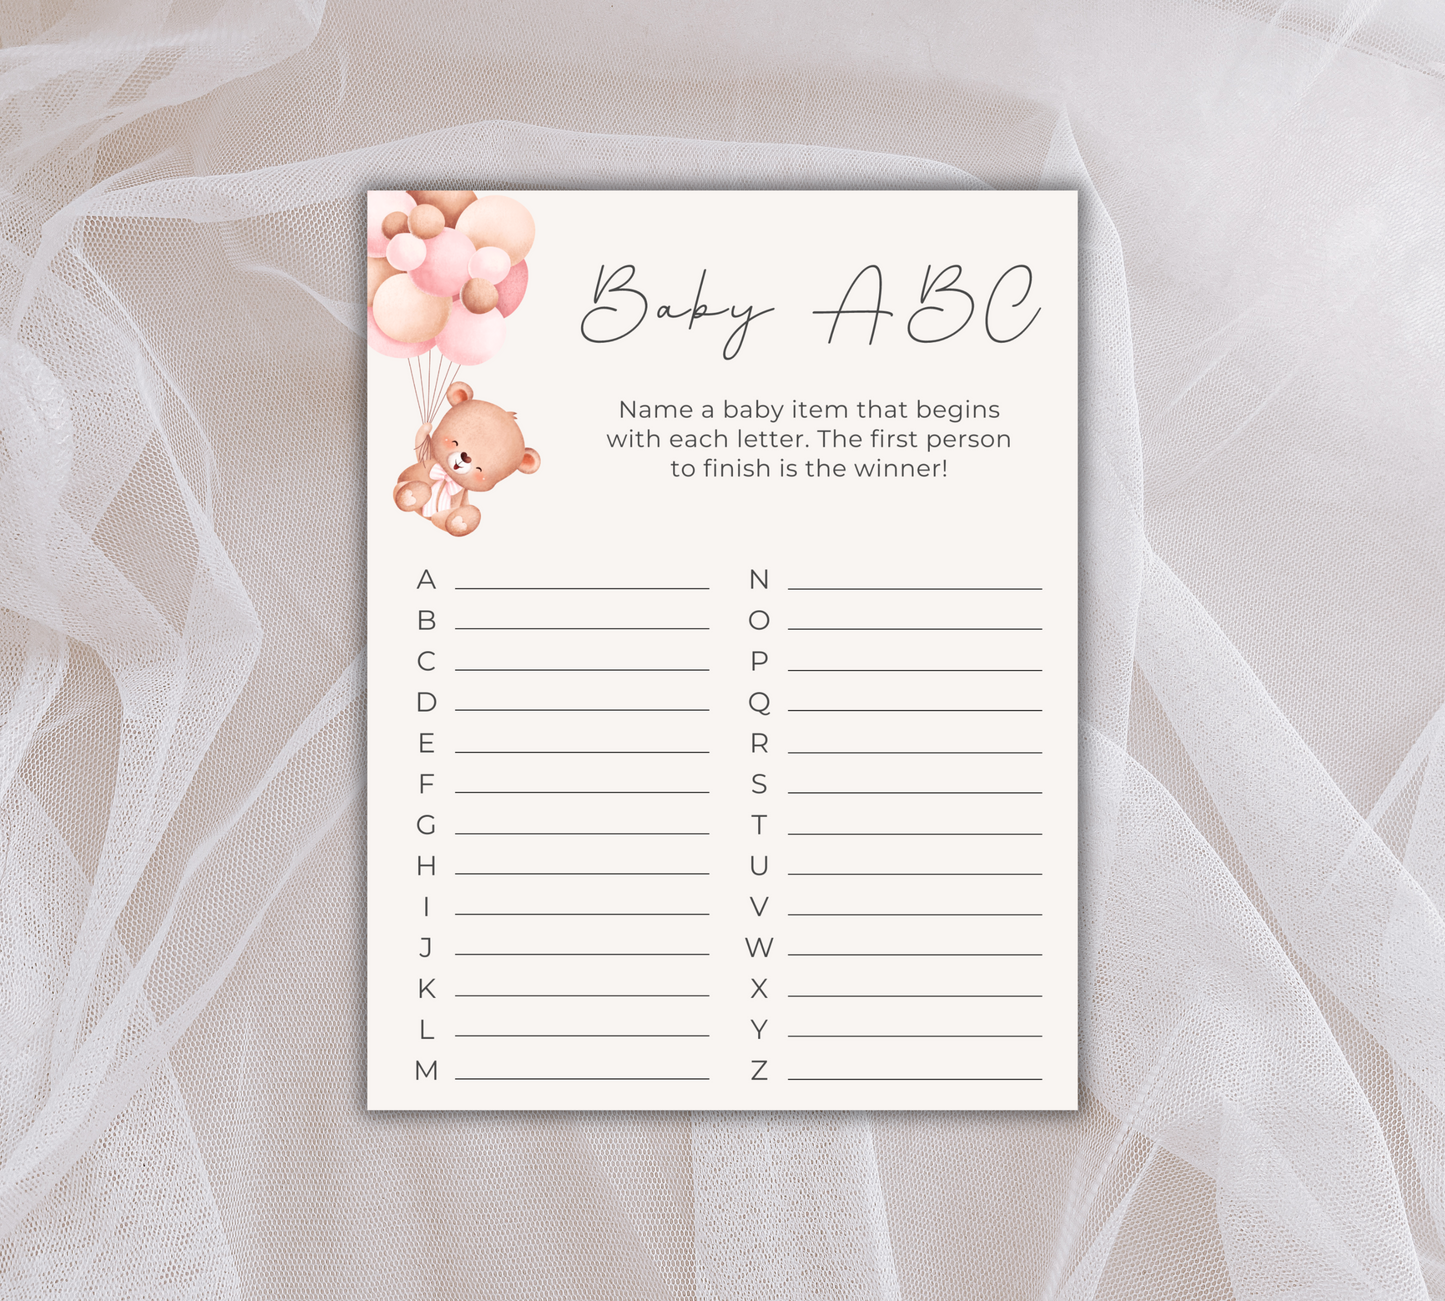 Pretty in Pink Baby Shower Games